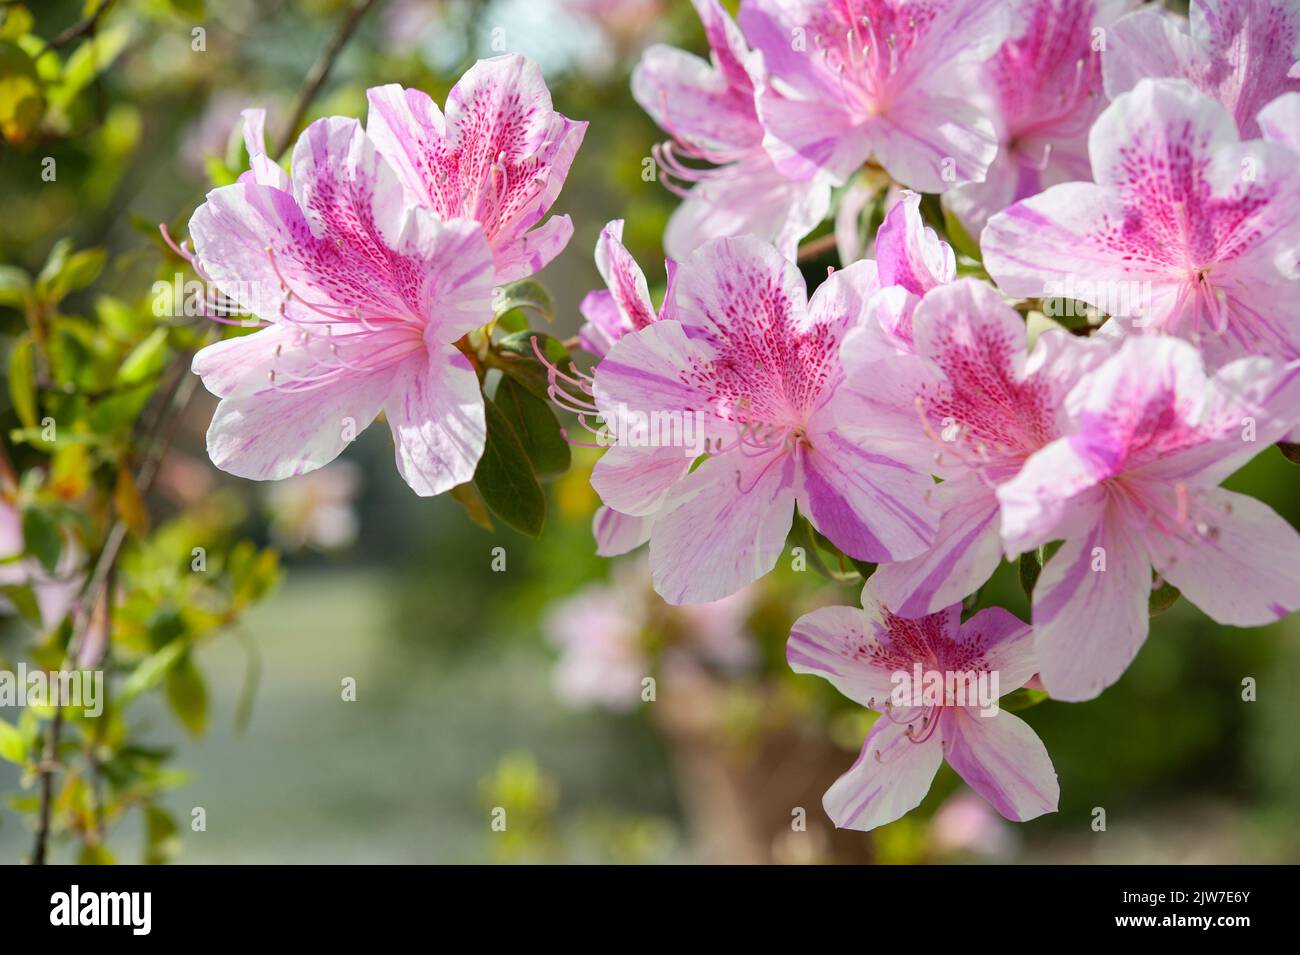 Rhododendron yedoense f. poukhanense, the Korean azalea, is a species of flowering plant in the family Ericaceae.. Stock Photo